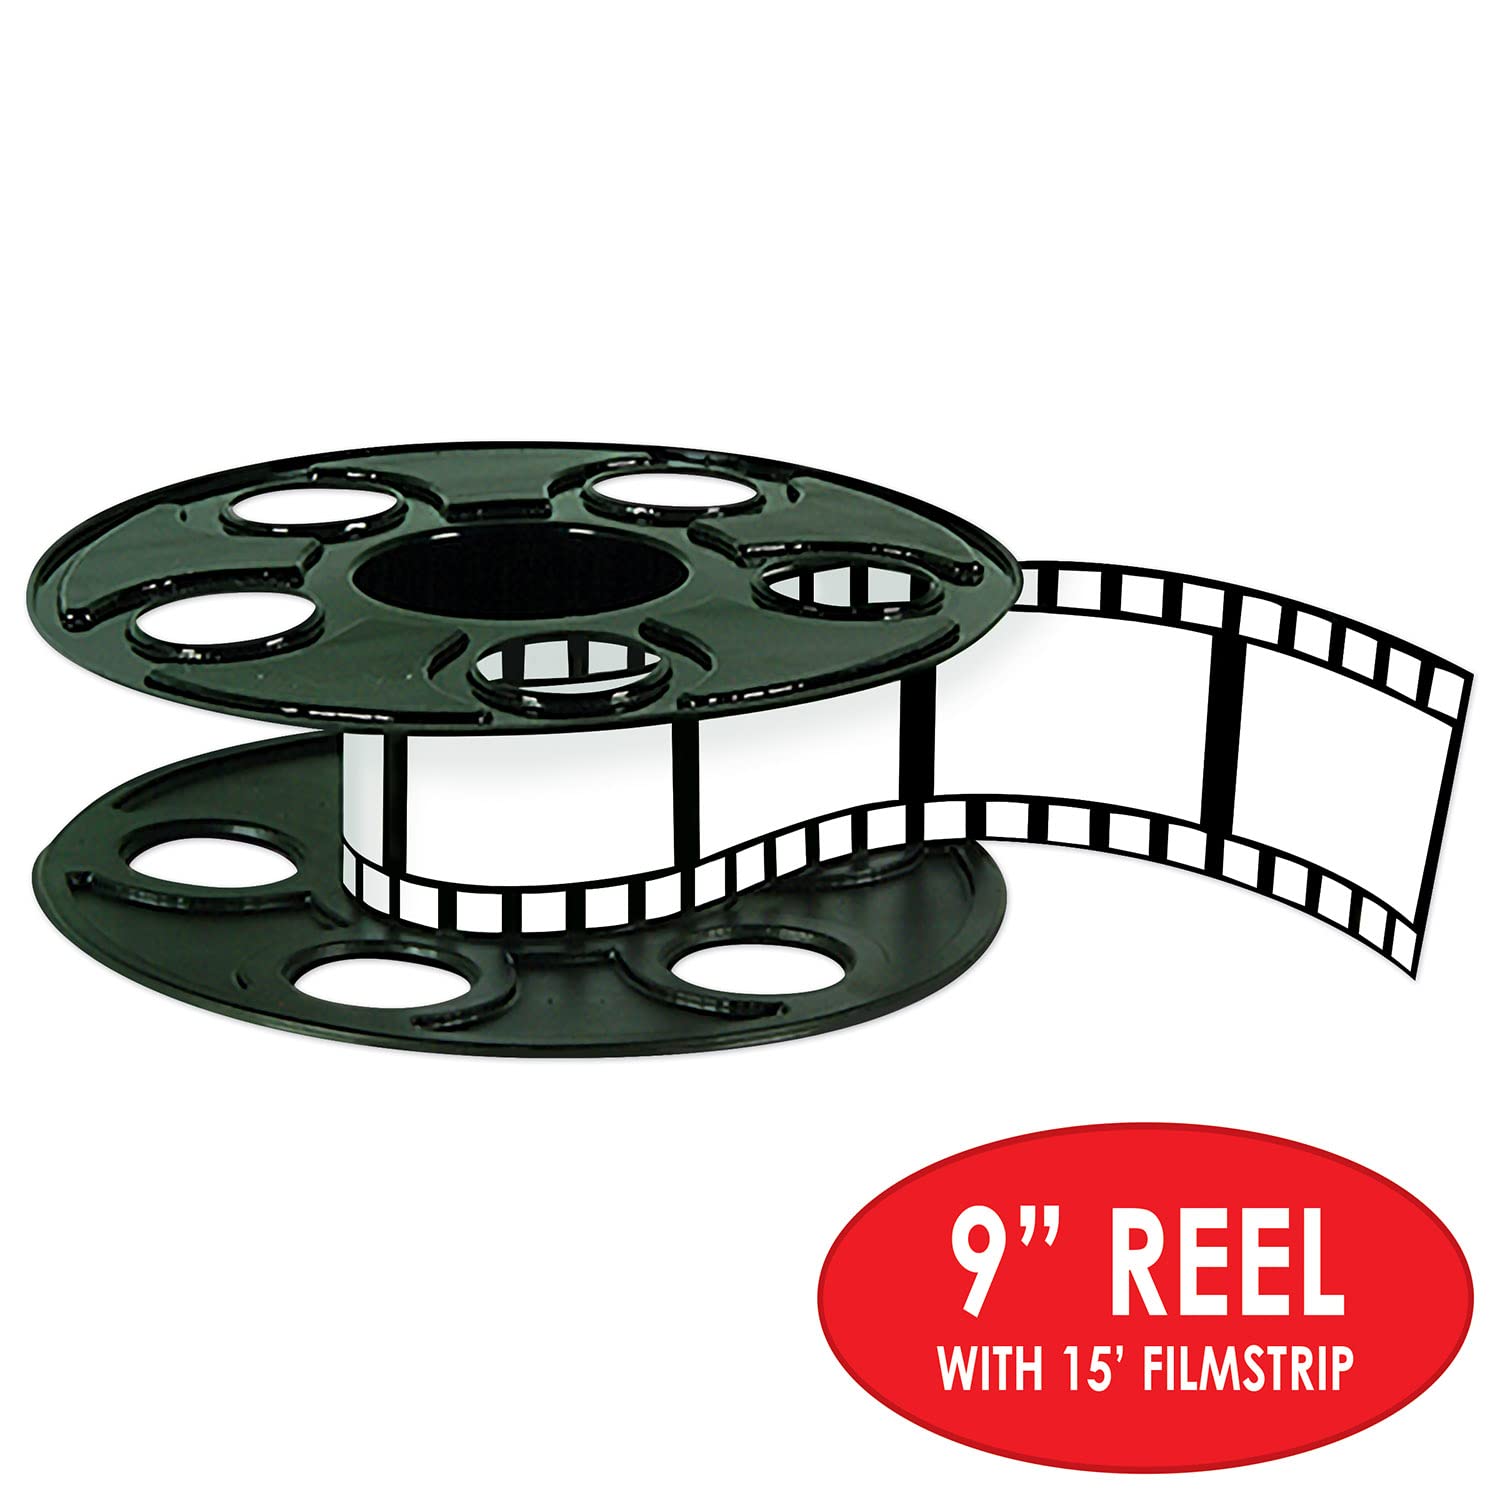 Beistle 2 Piece Awards Night Movie Reel with Filmstrip Centerpiece Red Carpet Hollywood Party Decorations, 9